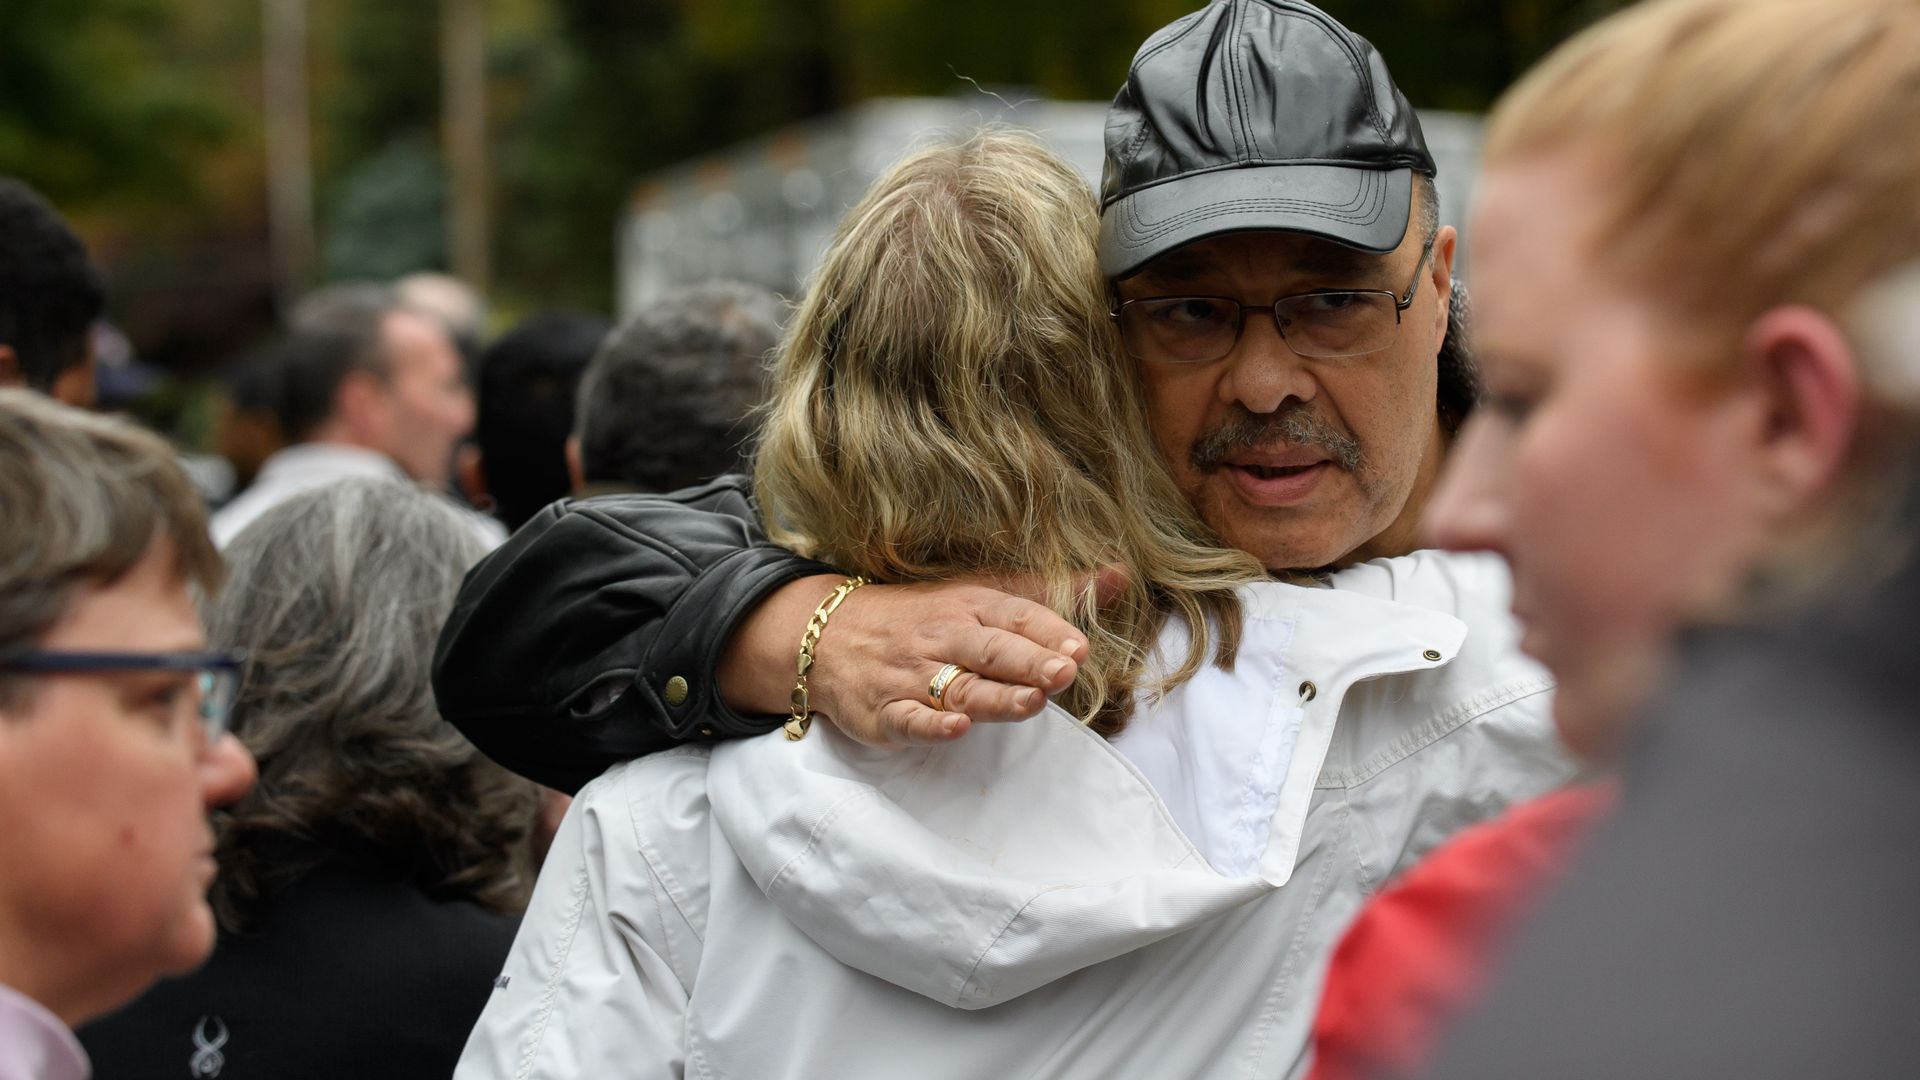 Man and woman hugging each other whlie at the crime scene of the pittsburgh shooting